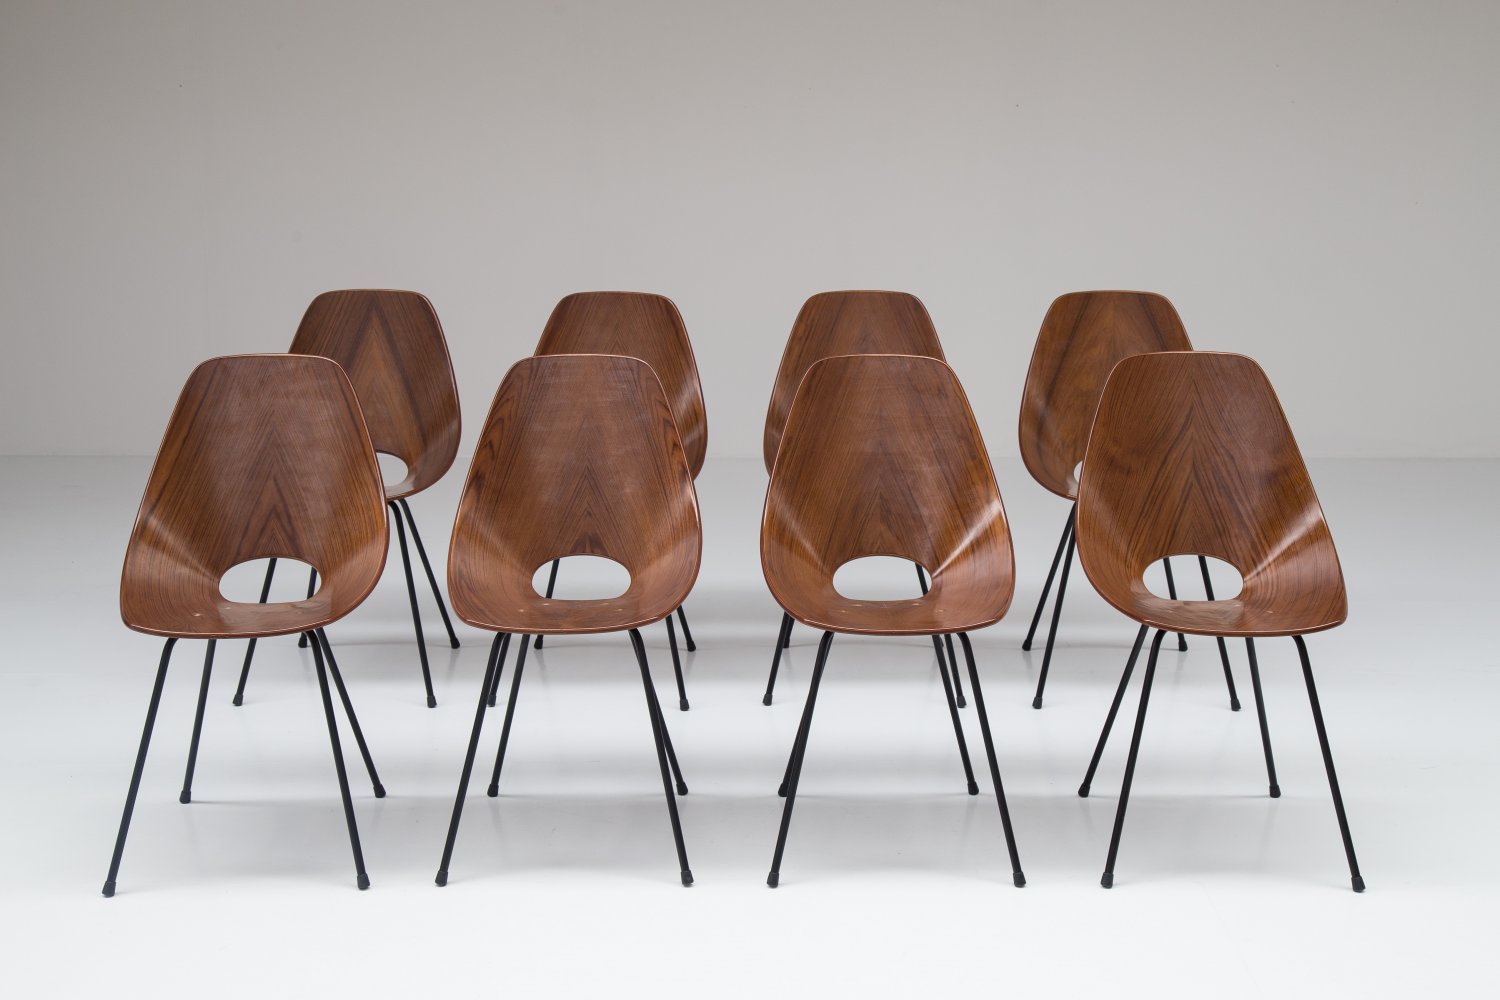 Set of 8 medea chairs by Vittorio Nobili 